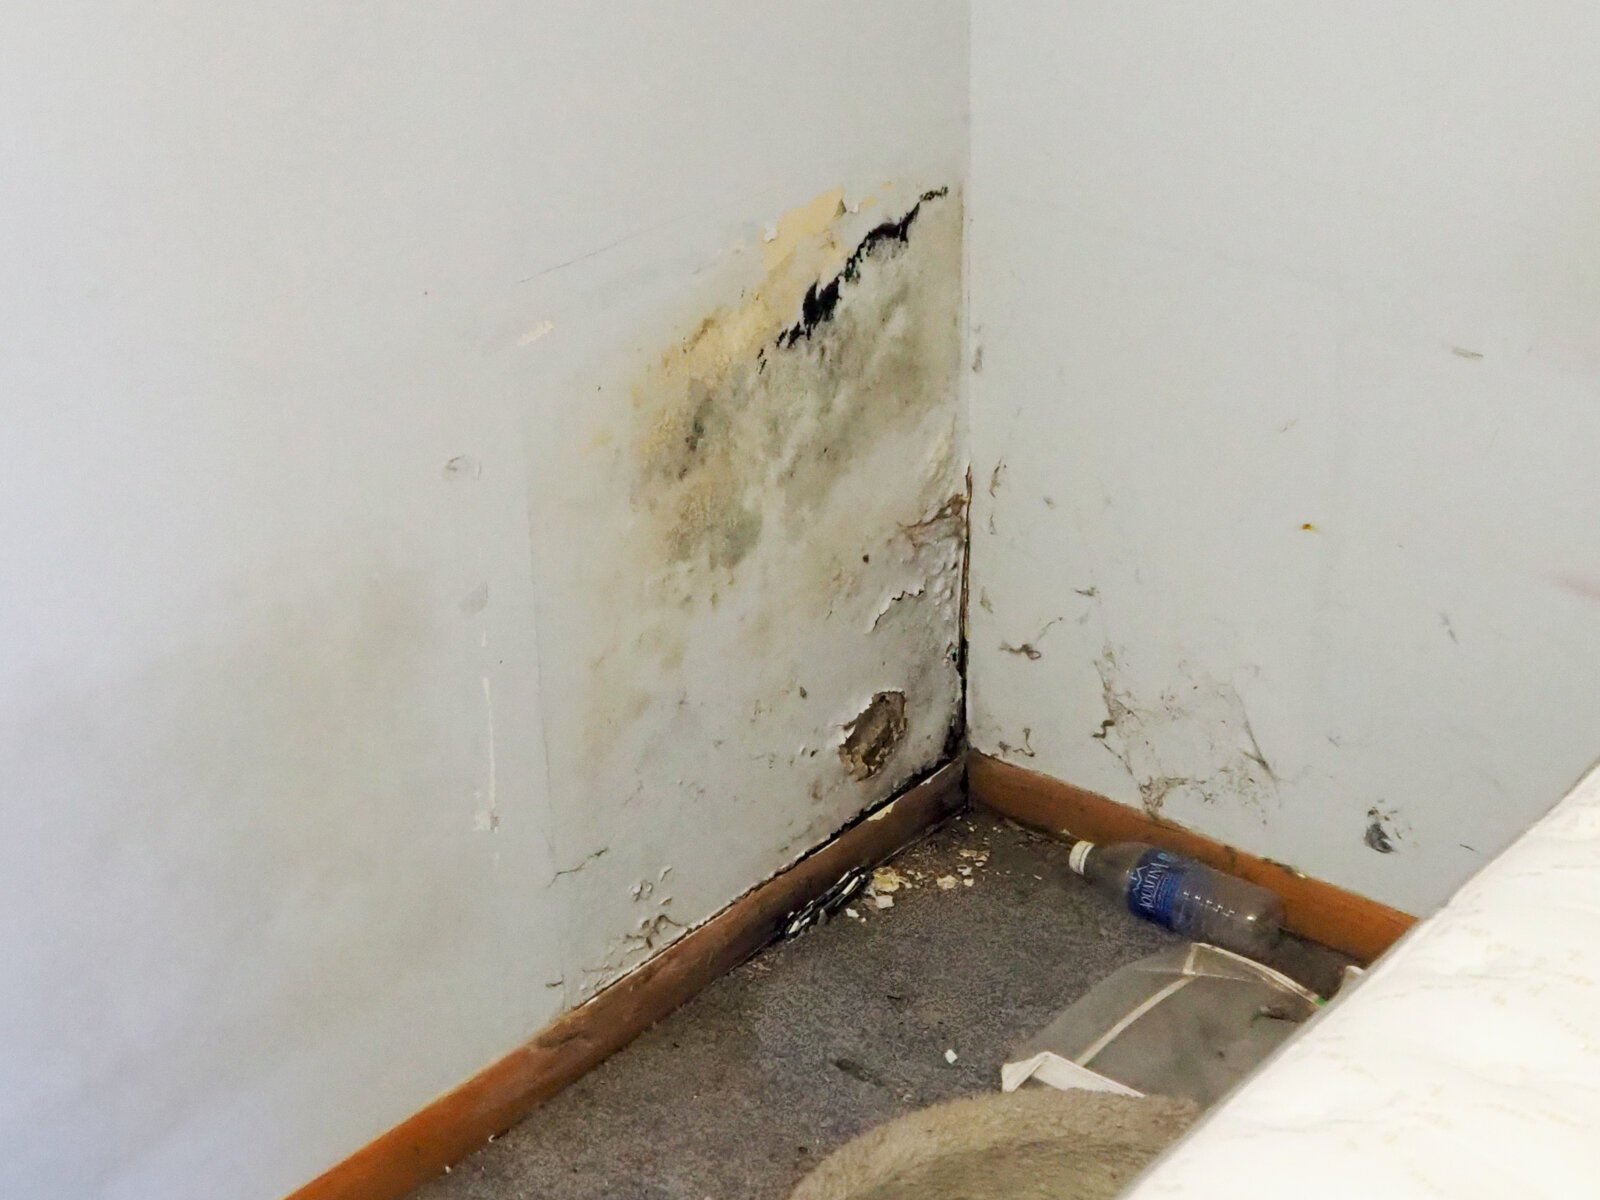 Selling A House With Mold Damage